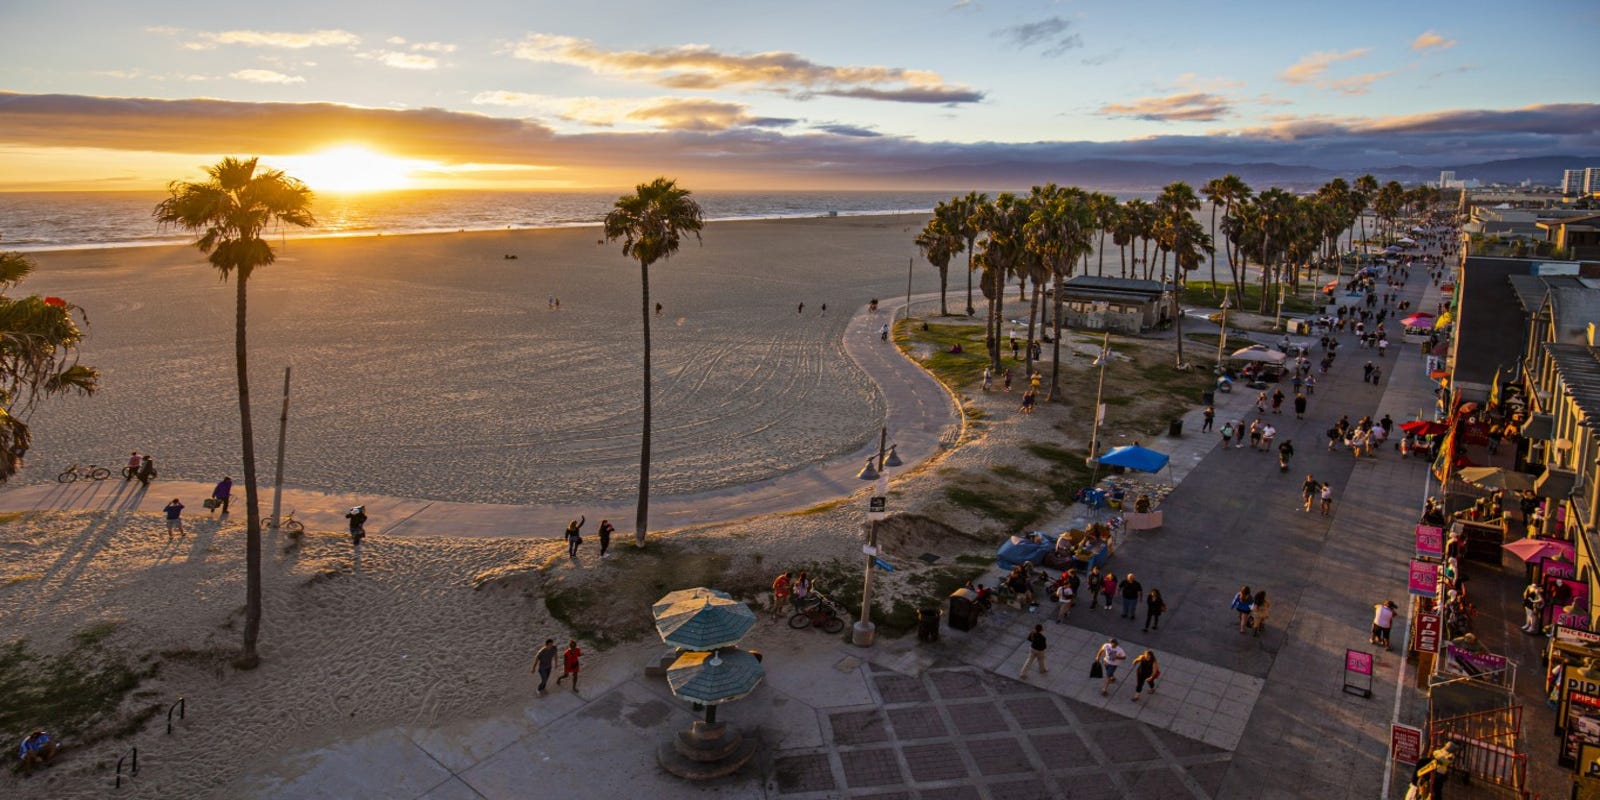 Beaches in Los Angeles, Long Beach closed after sewage spill up to 4M gallons